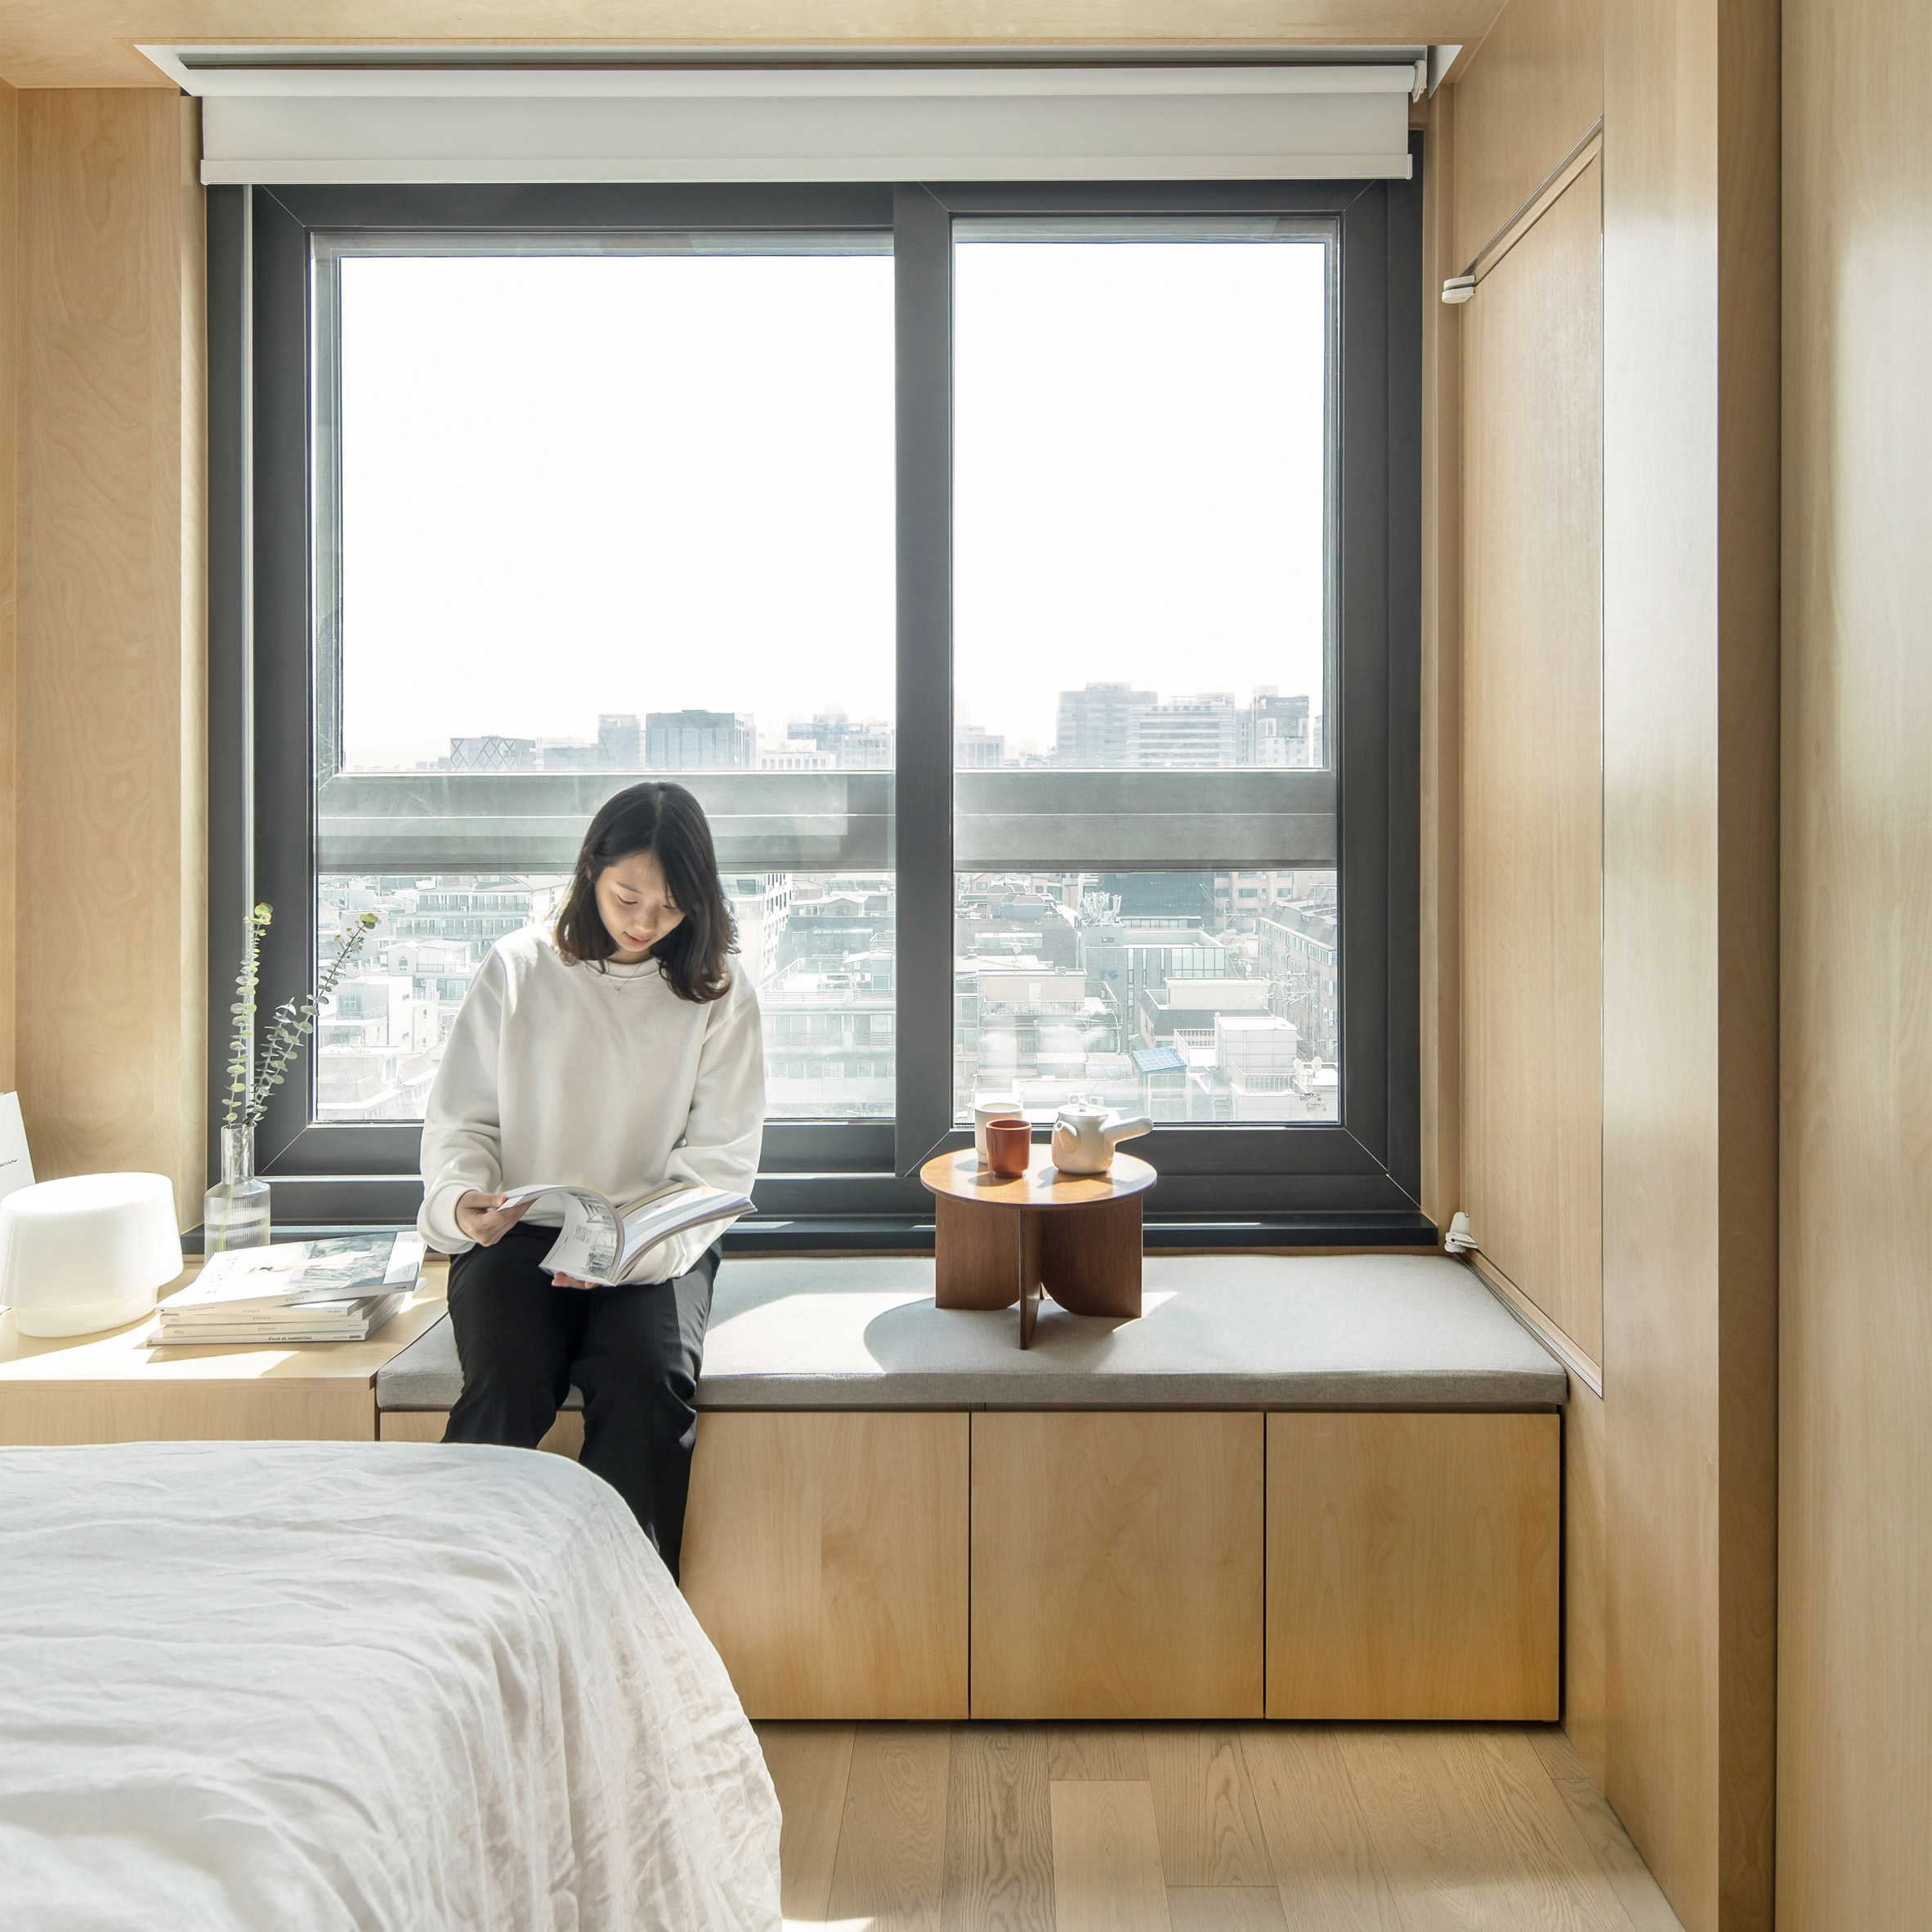 LIFE micro-apartments in Seoul form 